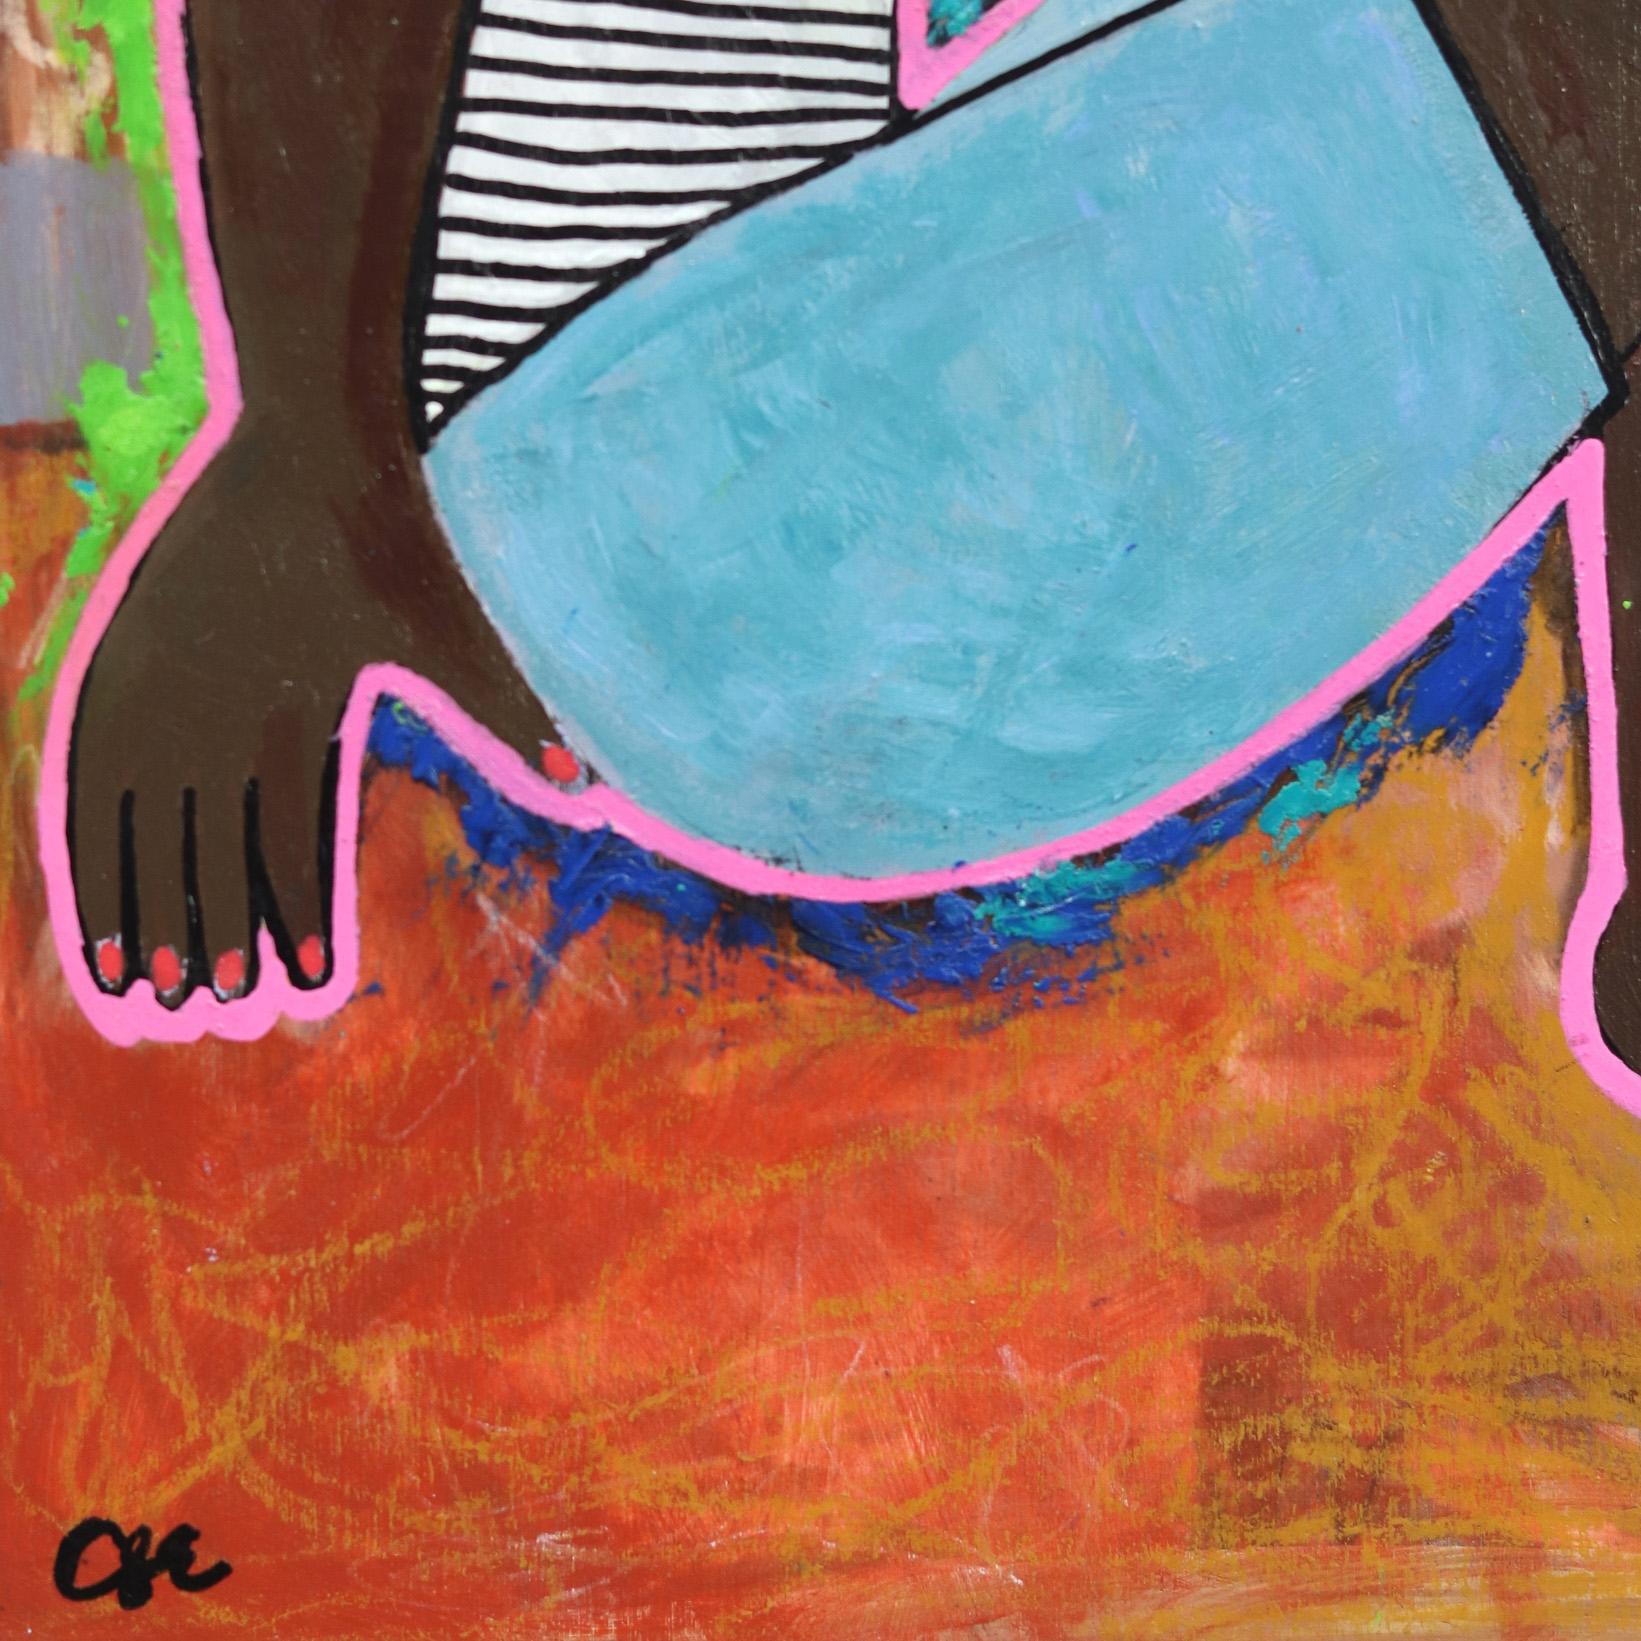 In My Room - Brown Figurative Painting by Courtney Simone